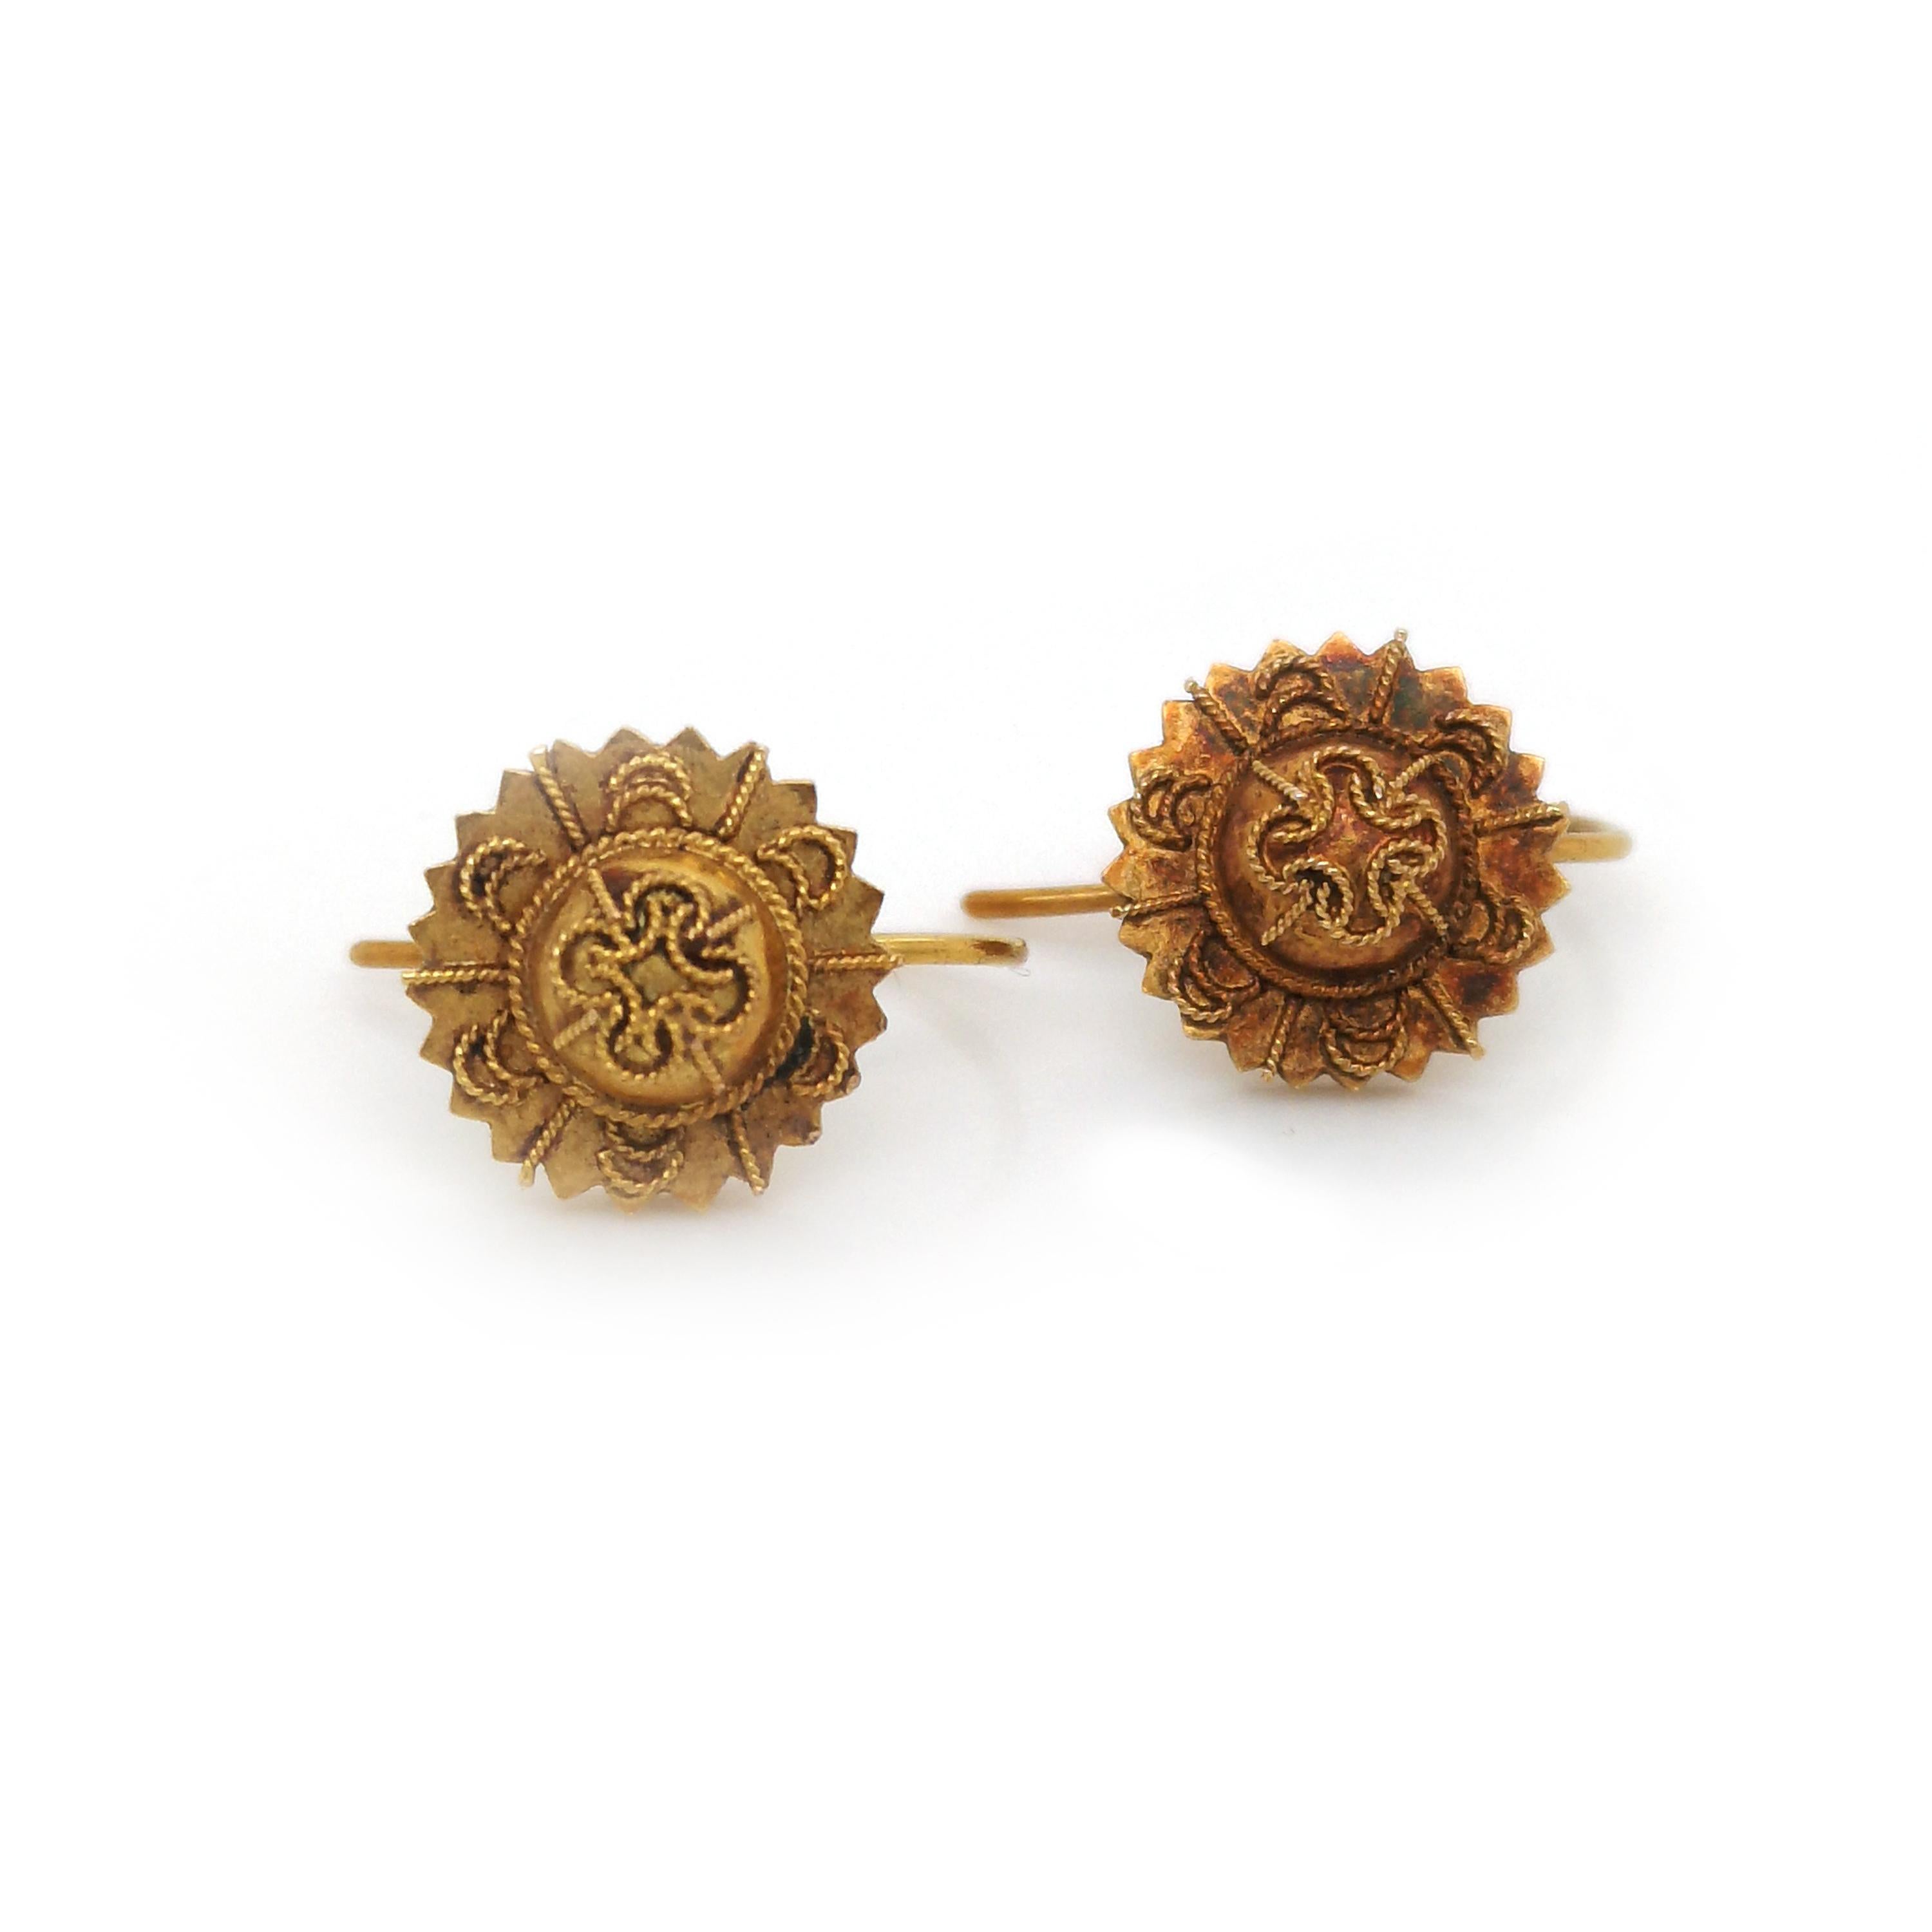 Victorian Etruscan Style Brooch And Earrings Gold Suite, Circa 1875 In Good Condition For Sale In London, GB